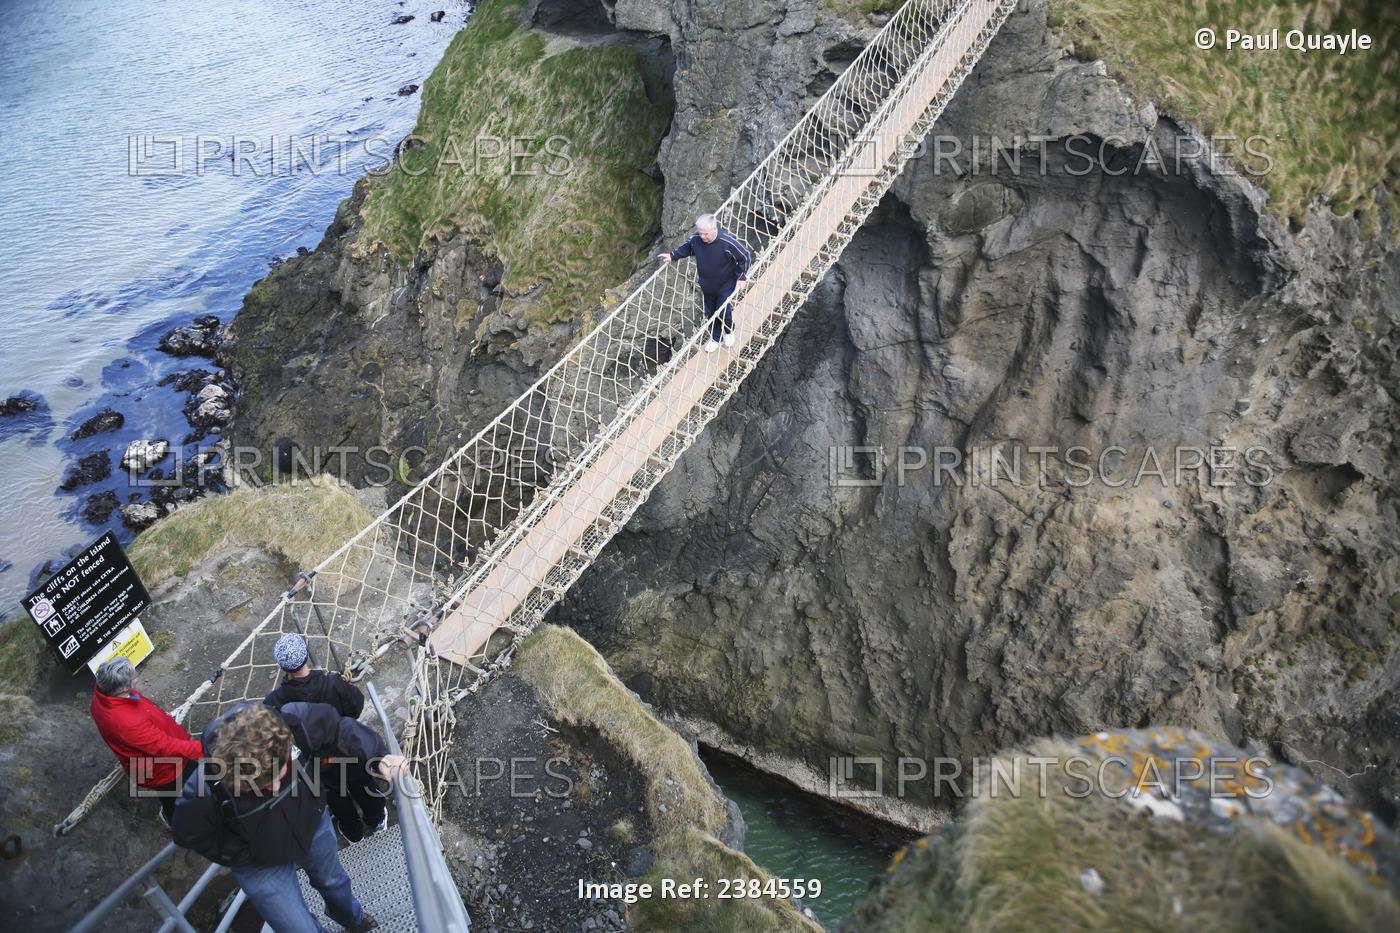 Crossing Carrick-A-Rede Rope Bridge, A Suspension Bridge Which Spans 20 Metres ...